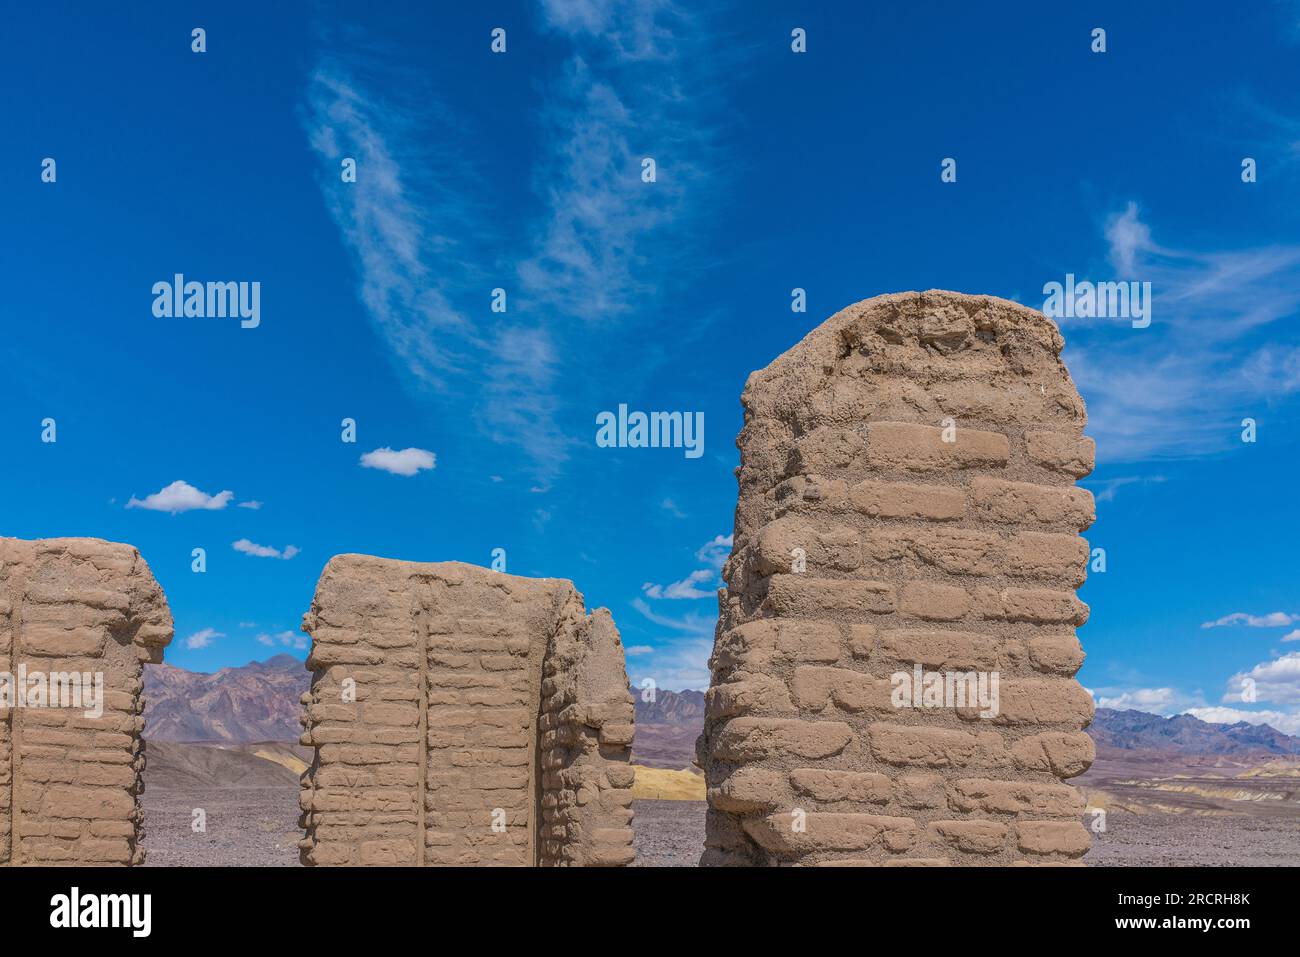 Eroded adobe brick columns at Harmony Borox Works in Death Valley National Park, California. Stock Photo